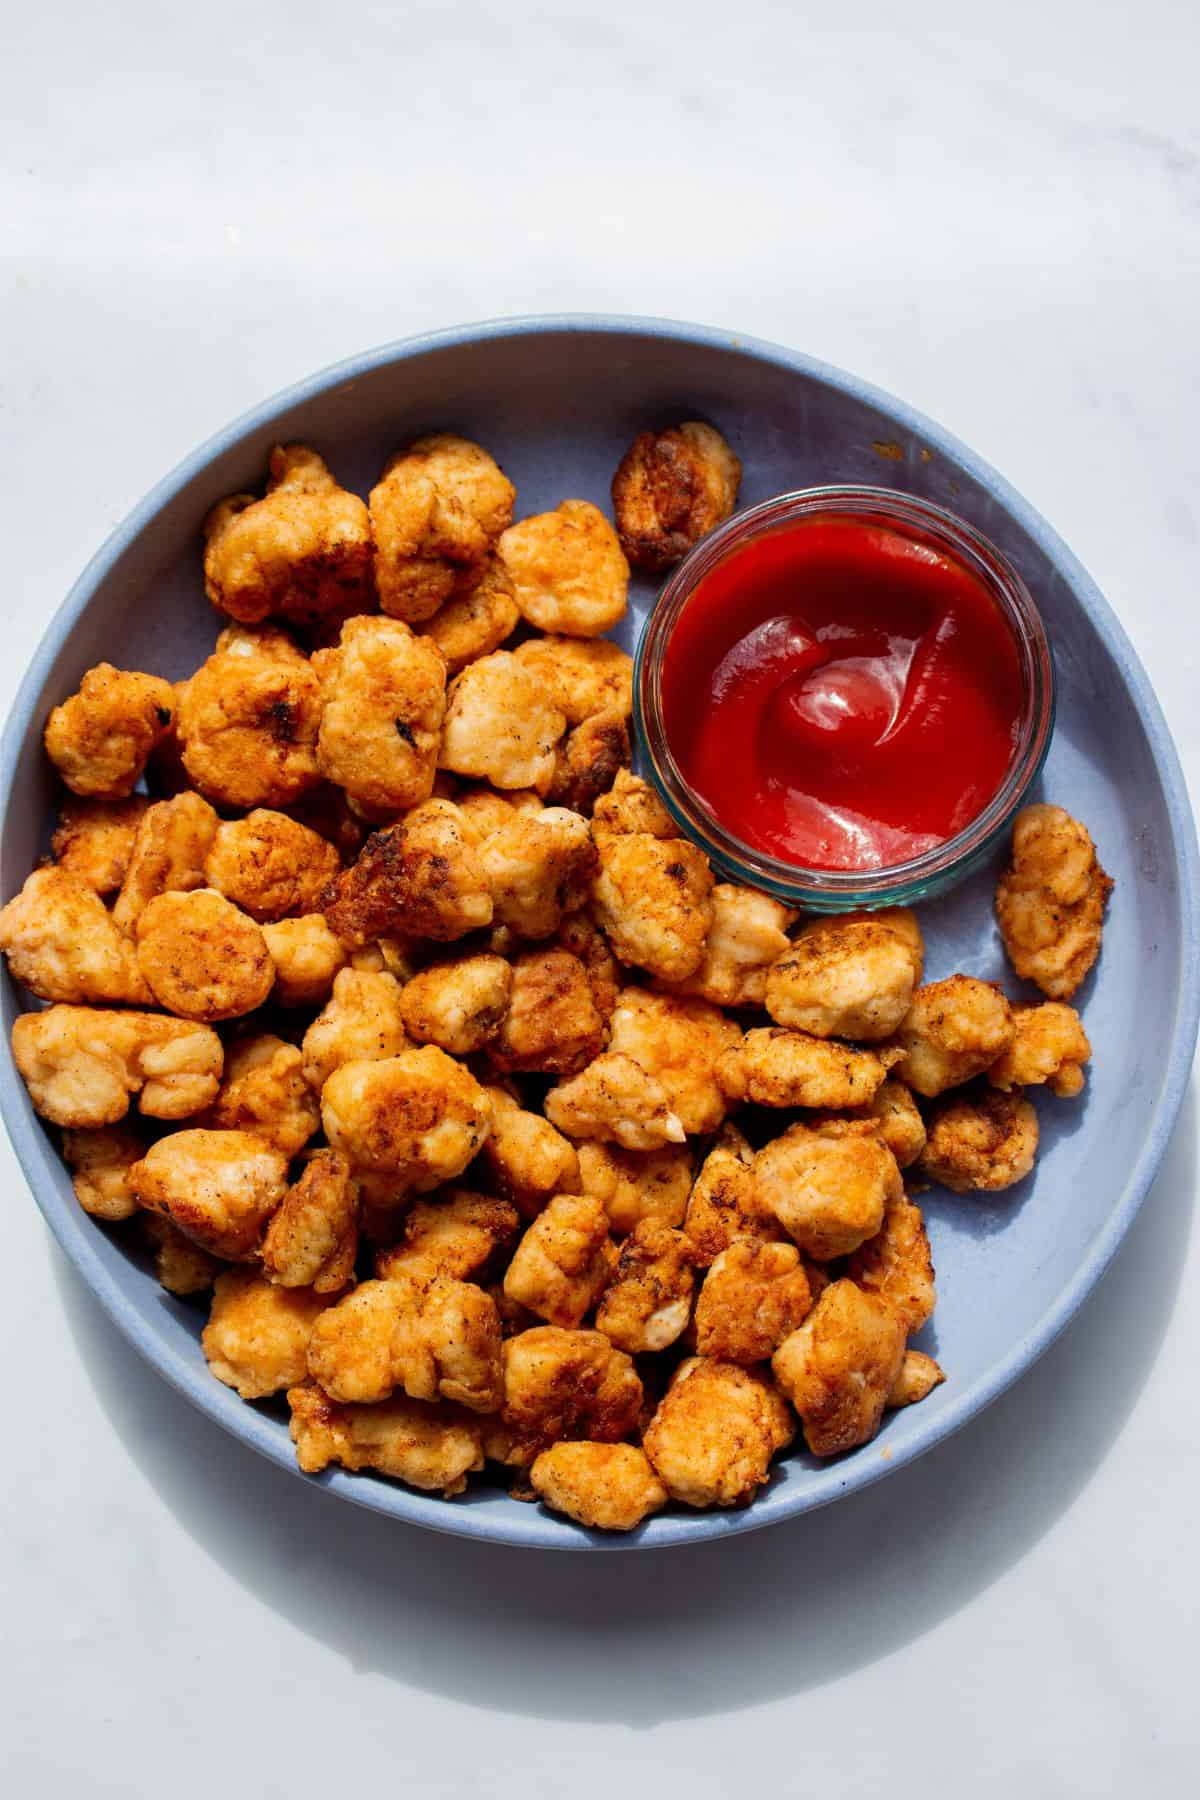 KFC pop corn chicken pieces served in a blue dish with tomato ketchup in a smaller glass dish on same plate.